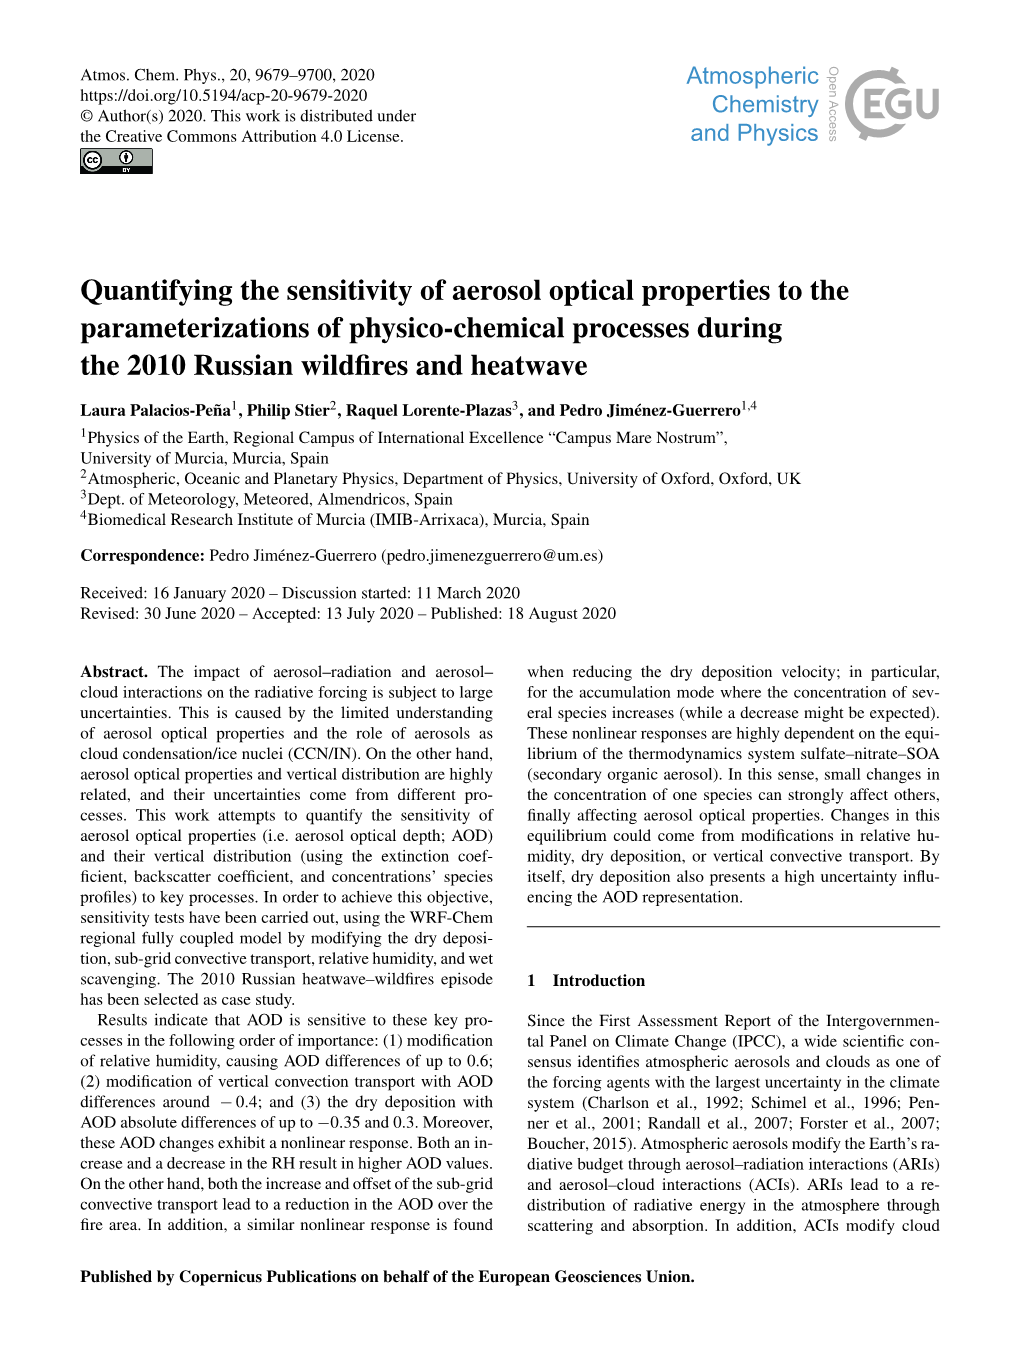 Quantifying the Sensitivity of Aerosol Optical Properties to the Parameterizations of Physico-Chemical Processes During the 2010 Russian Wildﬁres and Heatwave